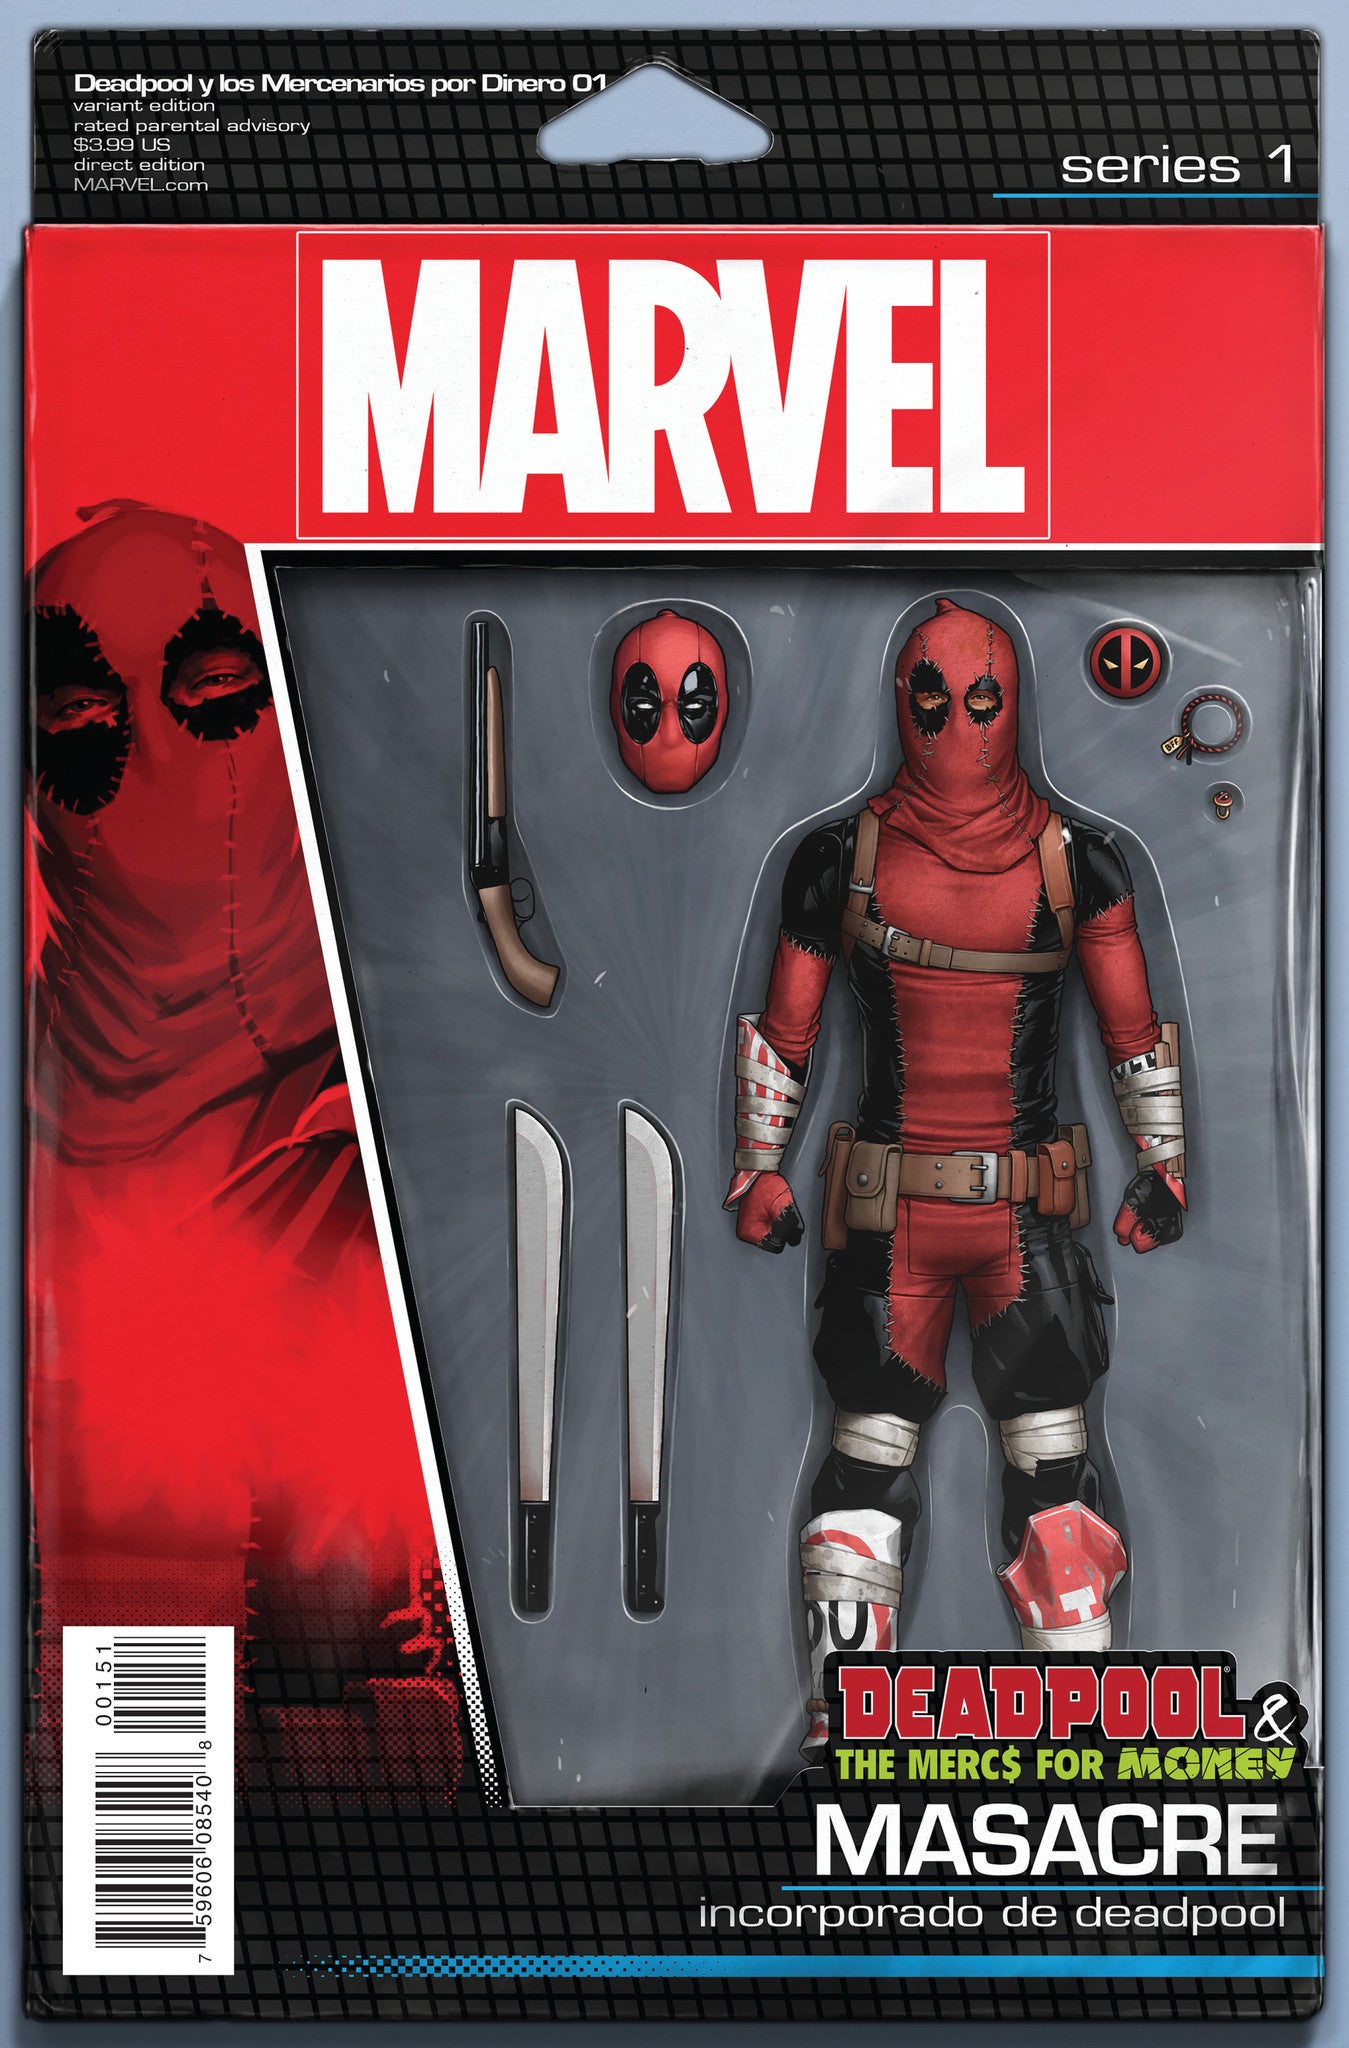 DEADPOOL AND MERCS FOR MONEY #1 CHRISTOPHER ACTION FIGURE VA COVER